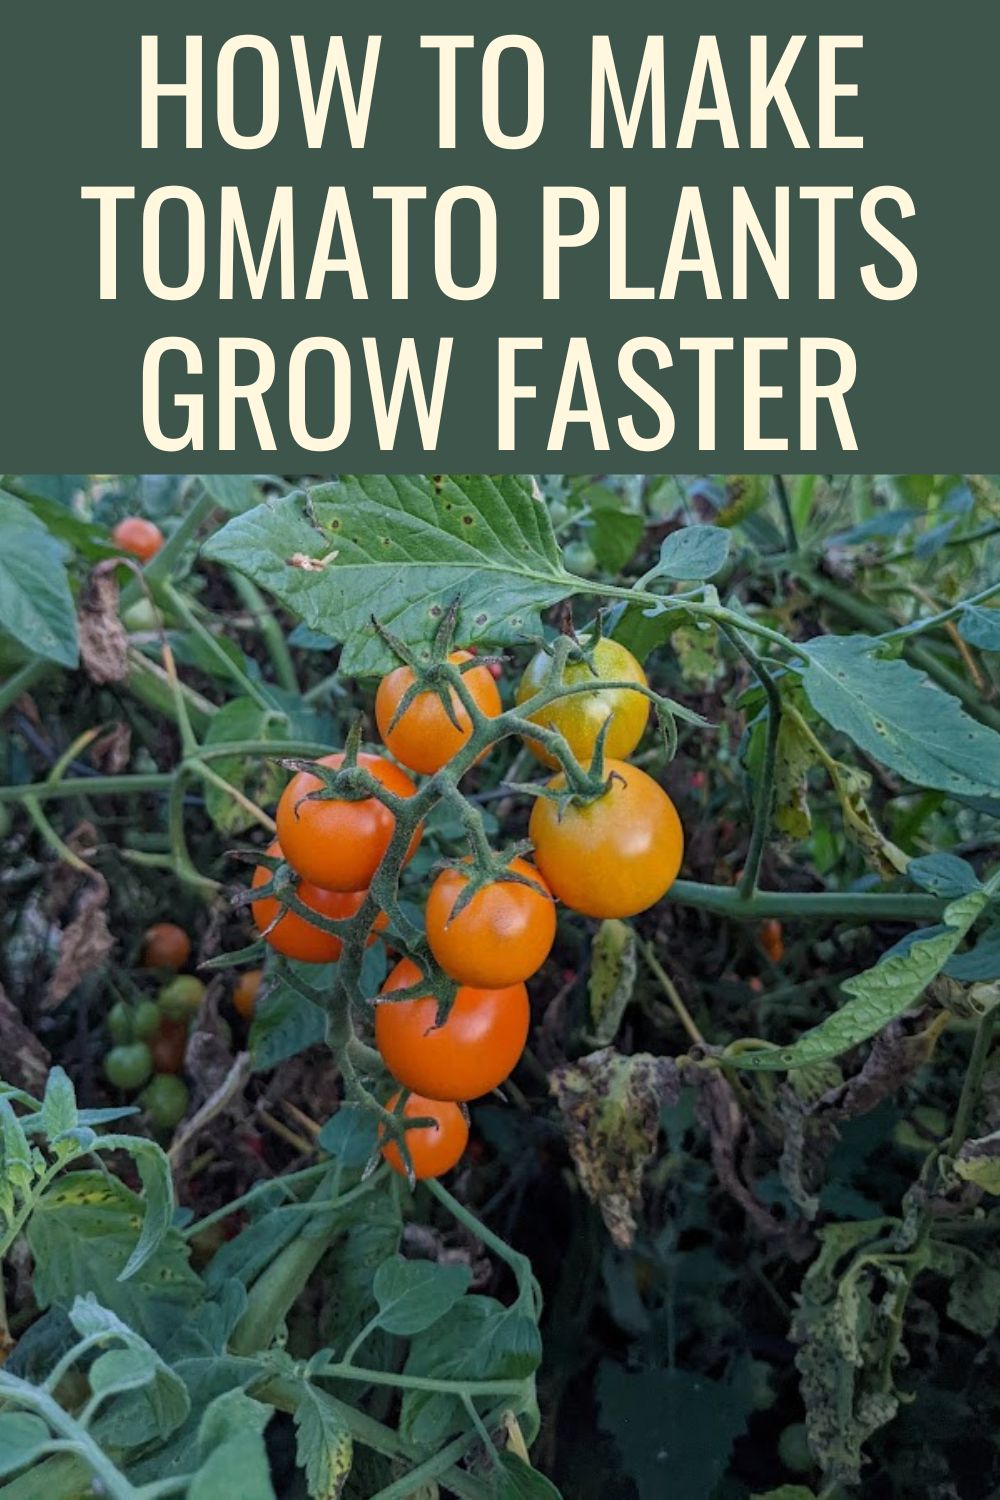 How to make tomato plants grow faster.